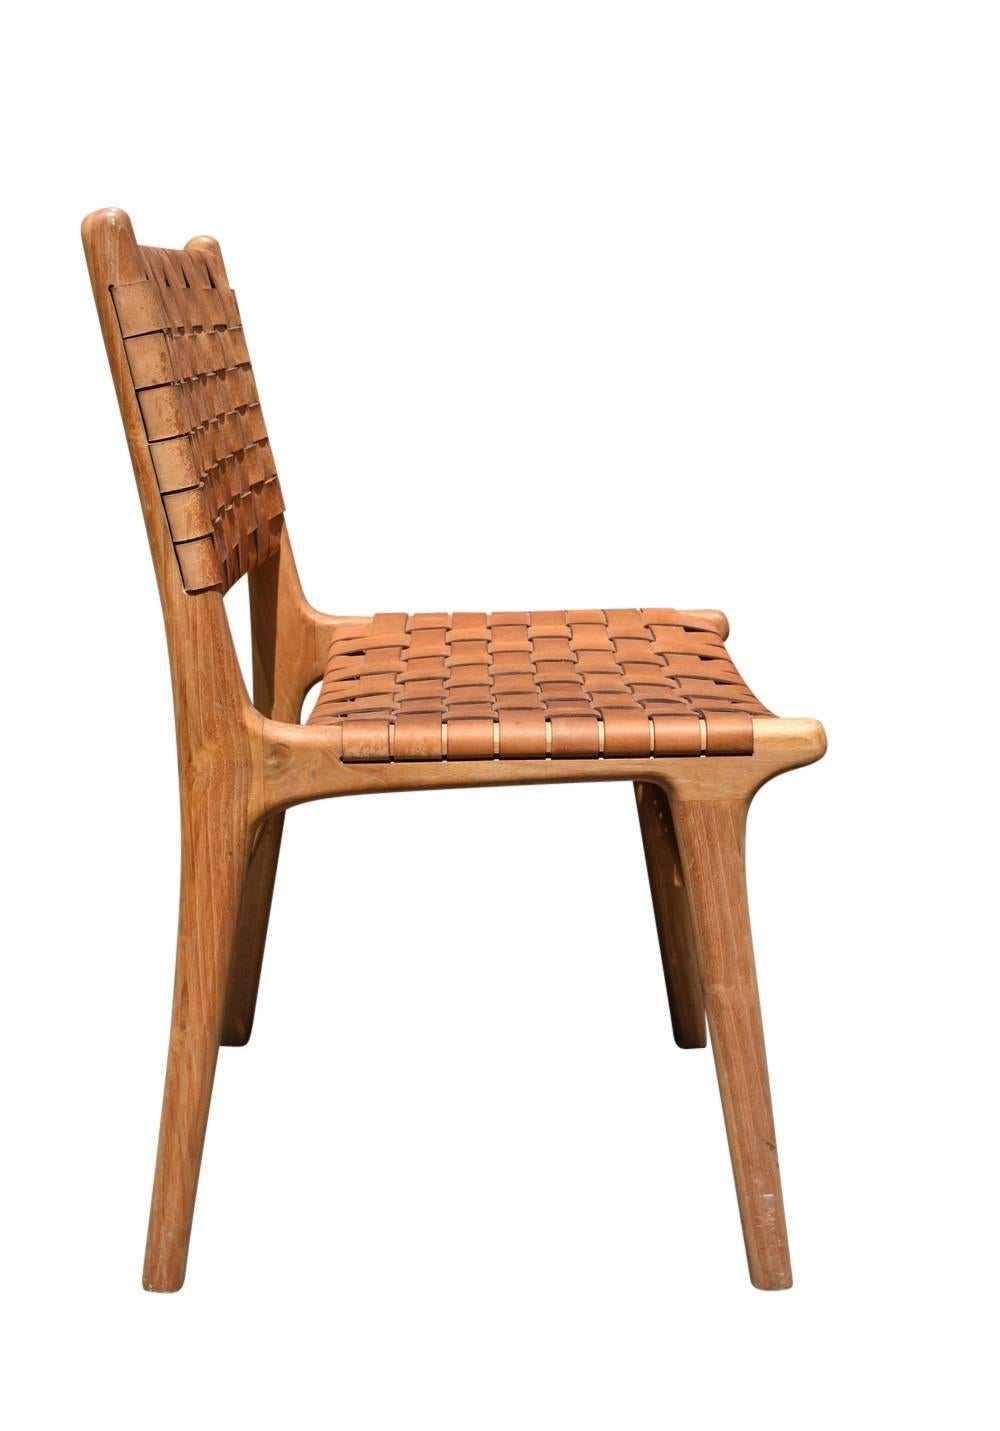 The "Flora" dining chair features natural leather strapping with brass finish tack. Shown with natural finish. These chairs are very comfortable and can be done in a number of different leather colors and finishes. 14-16 week lead time.